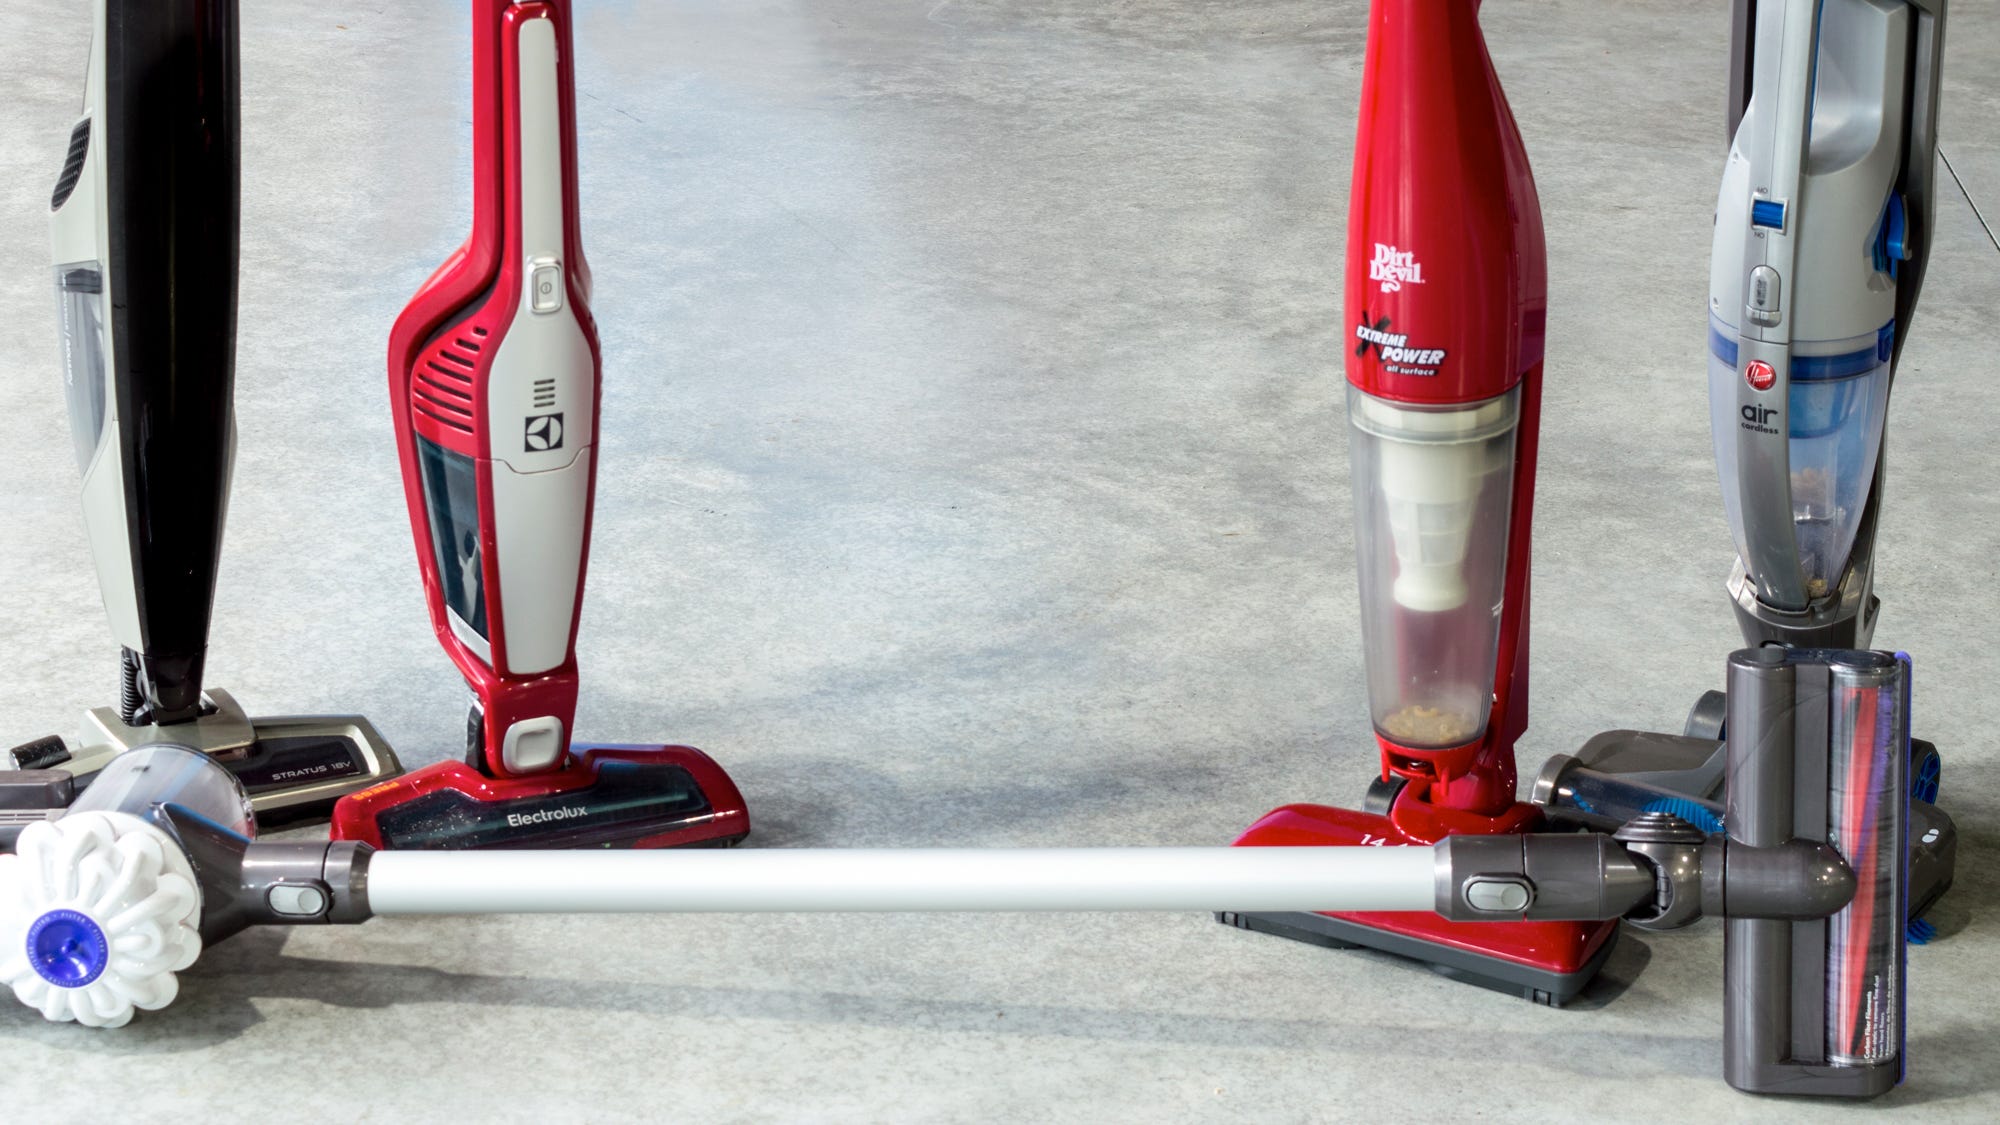 The Best Cordless Vacuums Of 2020, Best Cordless Stick Vacuum For Hardwood Floors